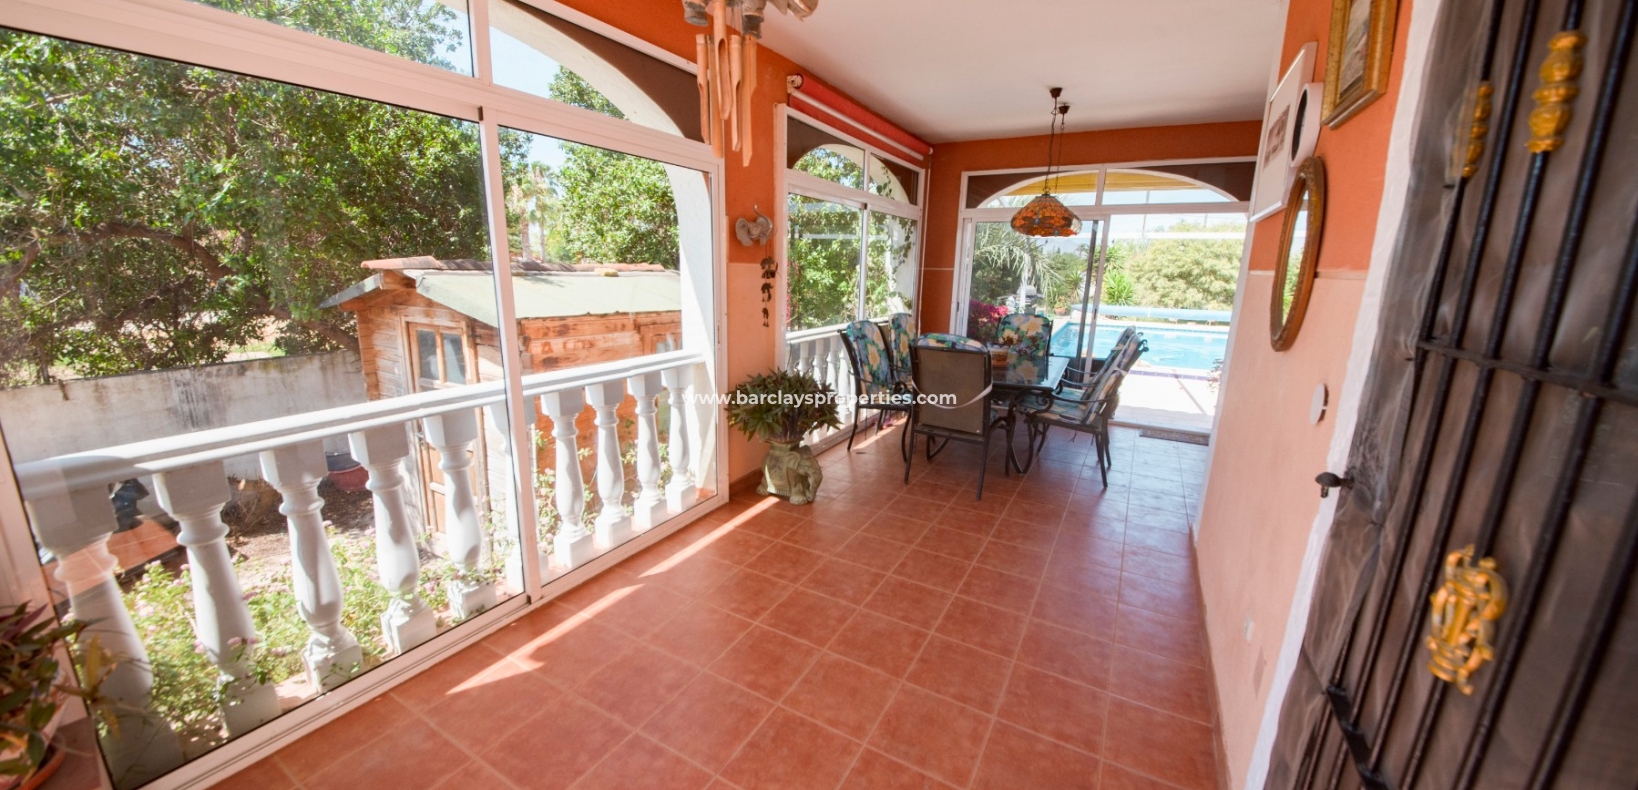 Glazed Porch - Country House For Sale in Catral, Spain